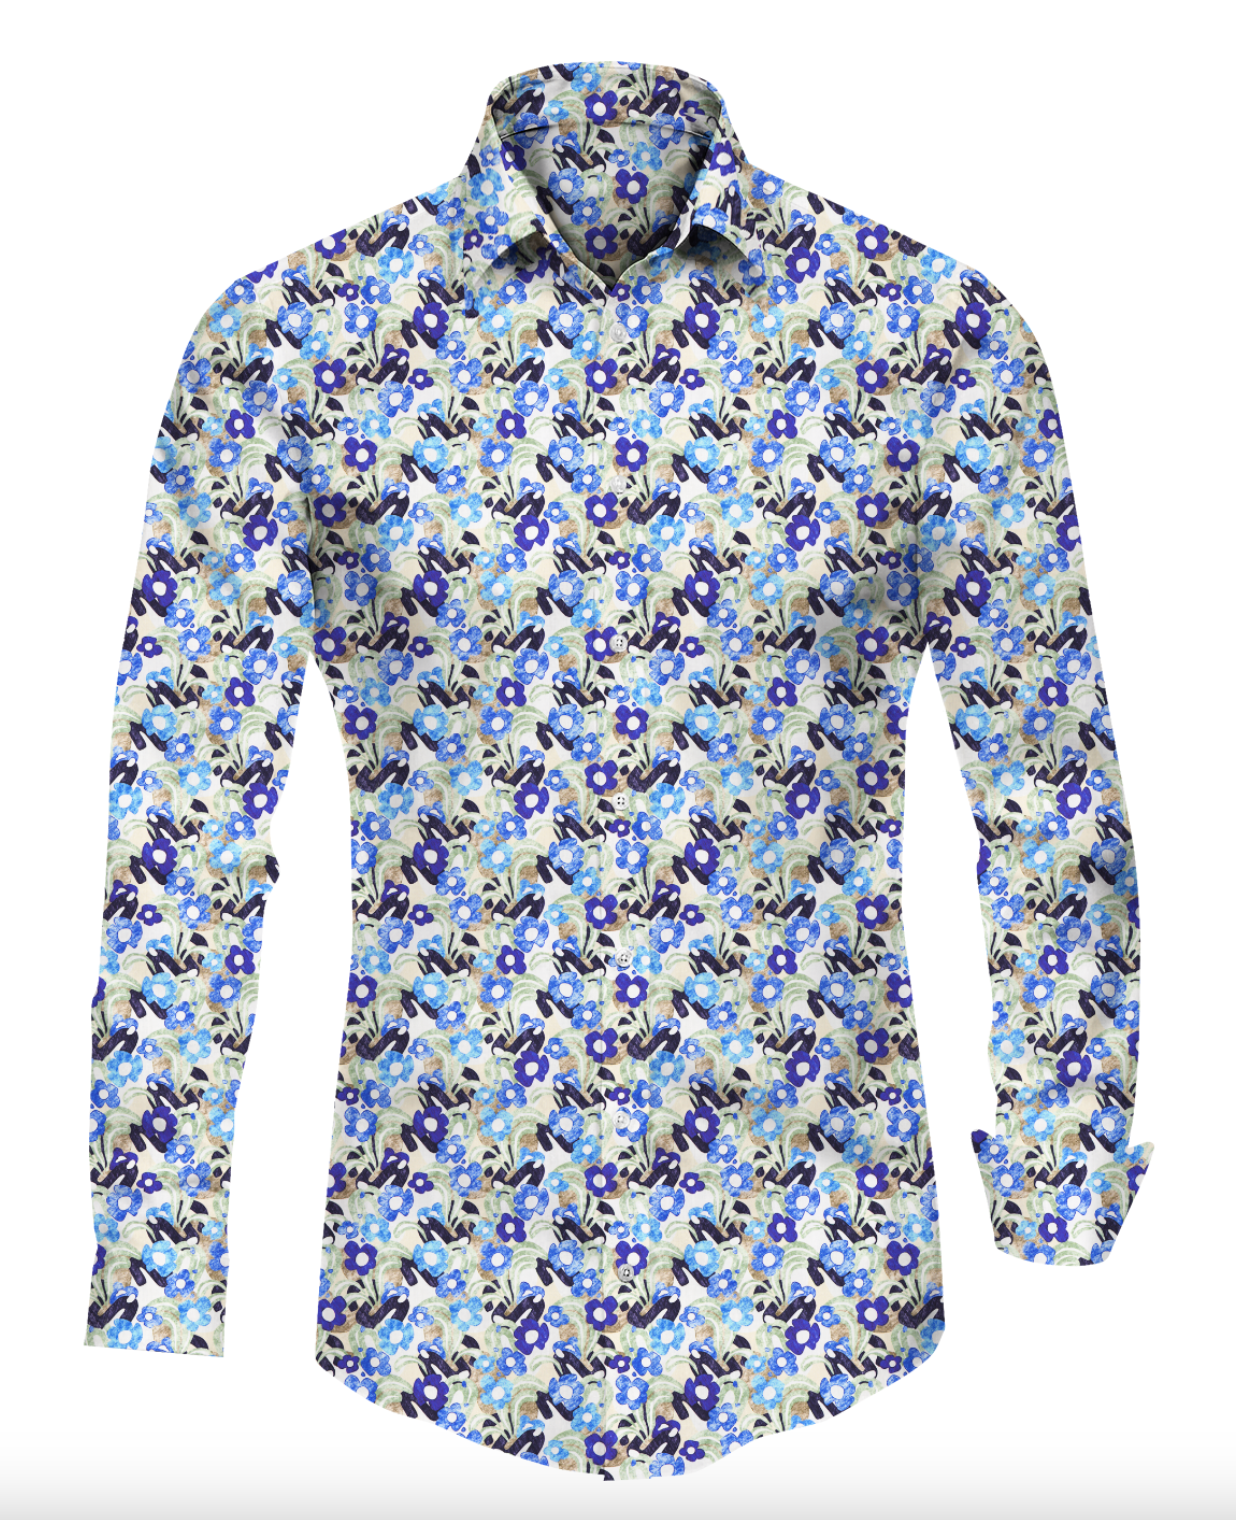 Acate Made To Order Shirt | Always Get Lucky